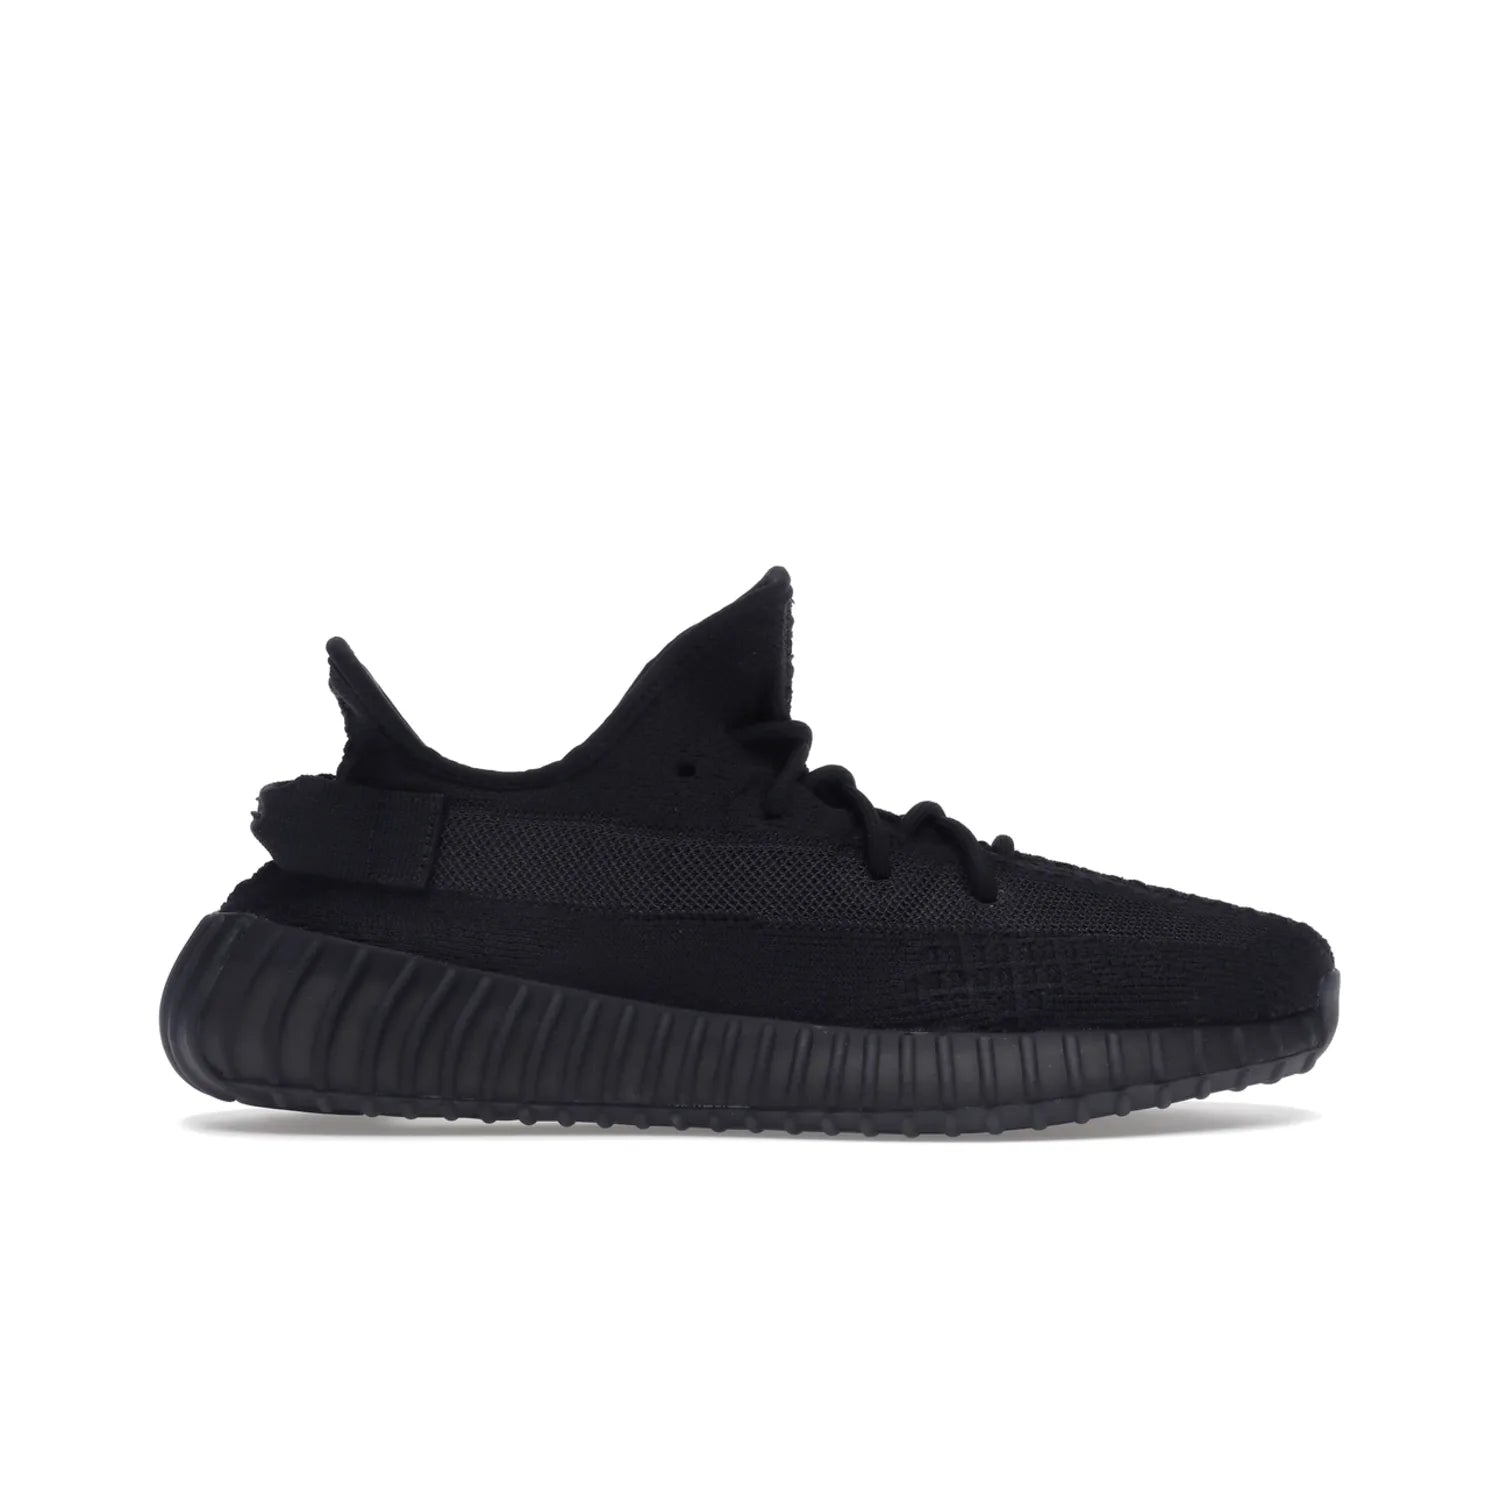 adidas Yeezy Boost 350 V2 Onyx - Image 1 - Only at www.BallersClubKickz.com - Adidas Yeezy Boost 350 V2 Onyx Triple Black shoes for comfort and style. Arriving Spring 2022.